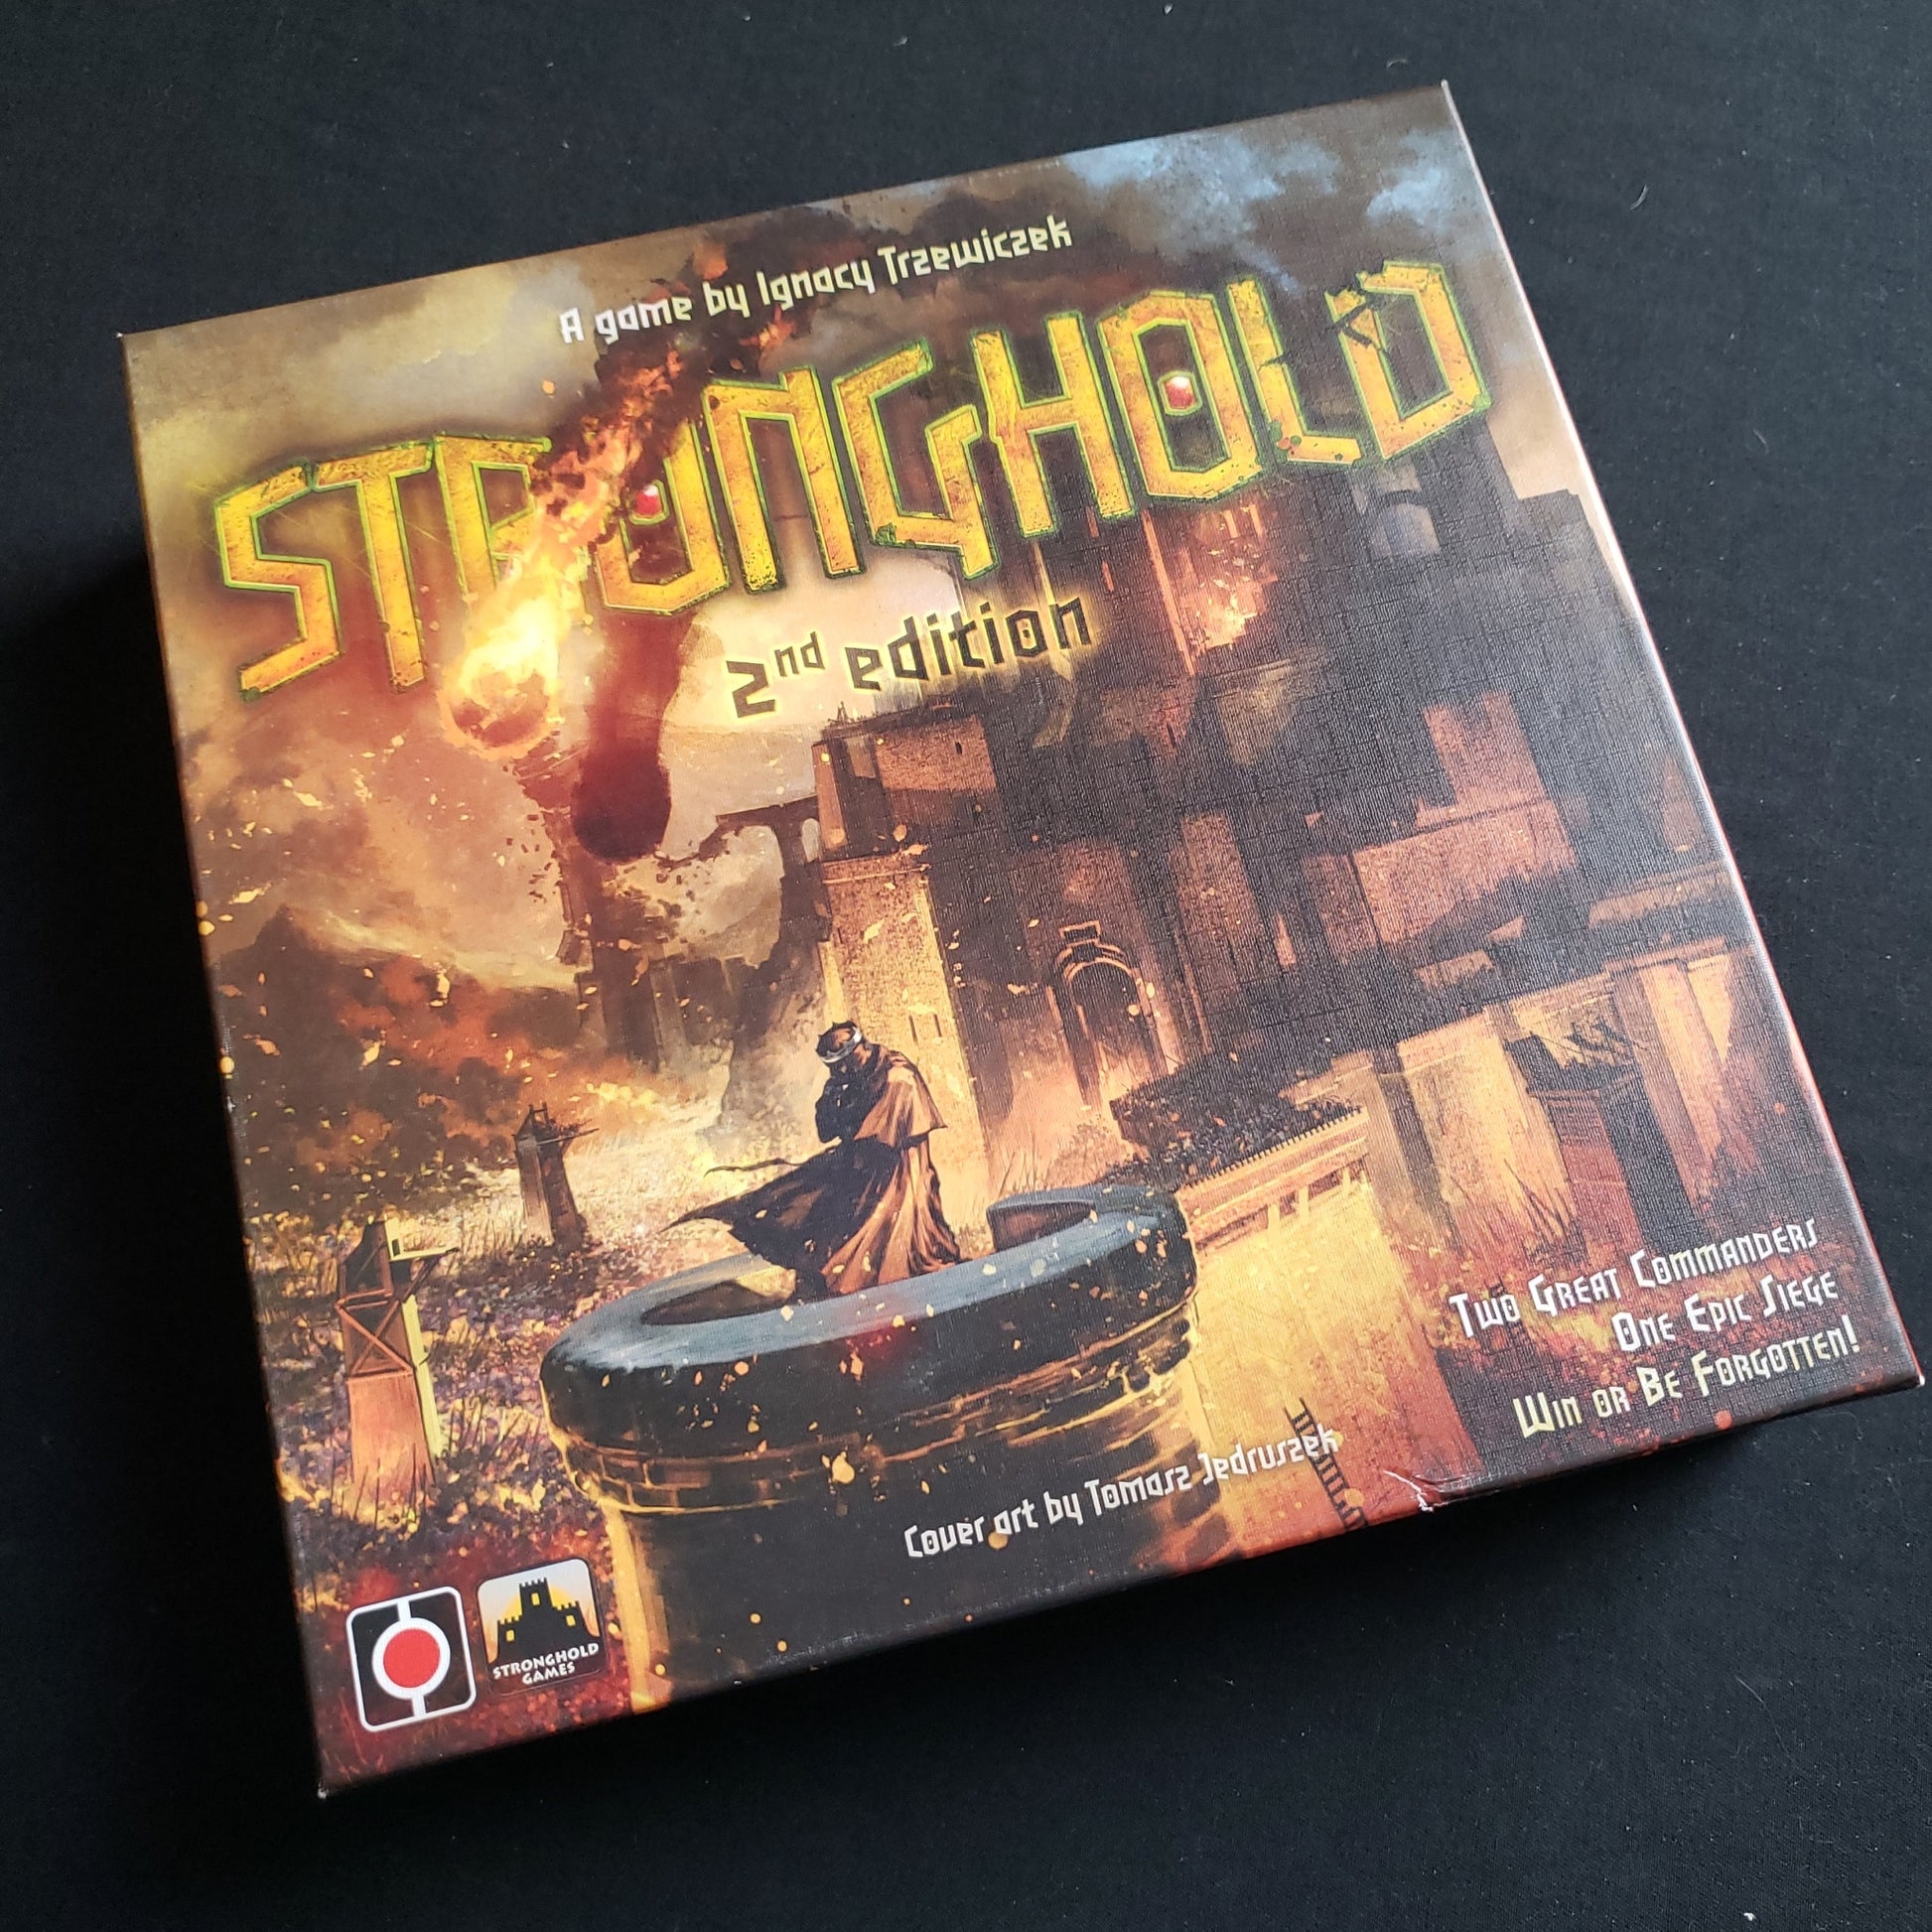 Image shows the front cover of the box of the Stronghold: Second Edition board game